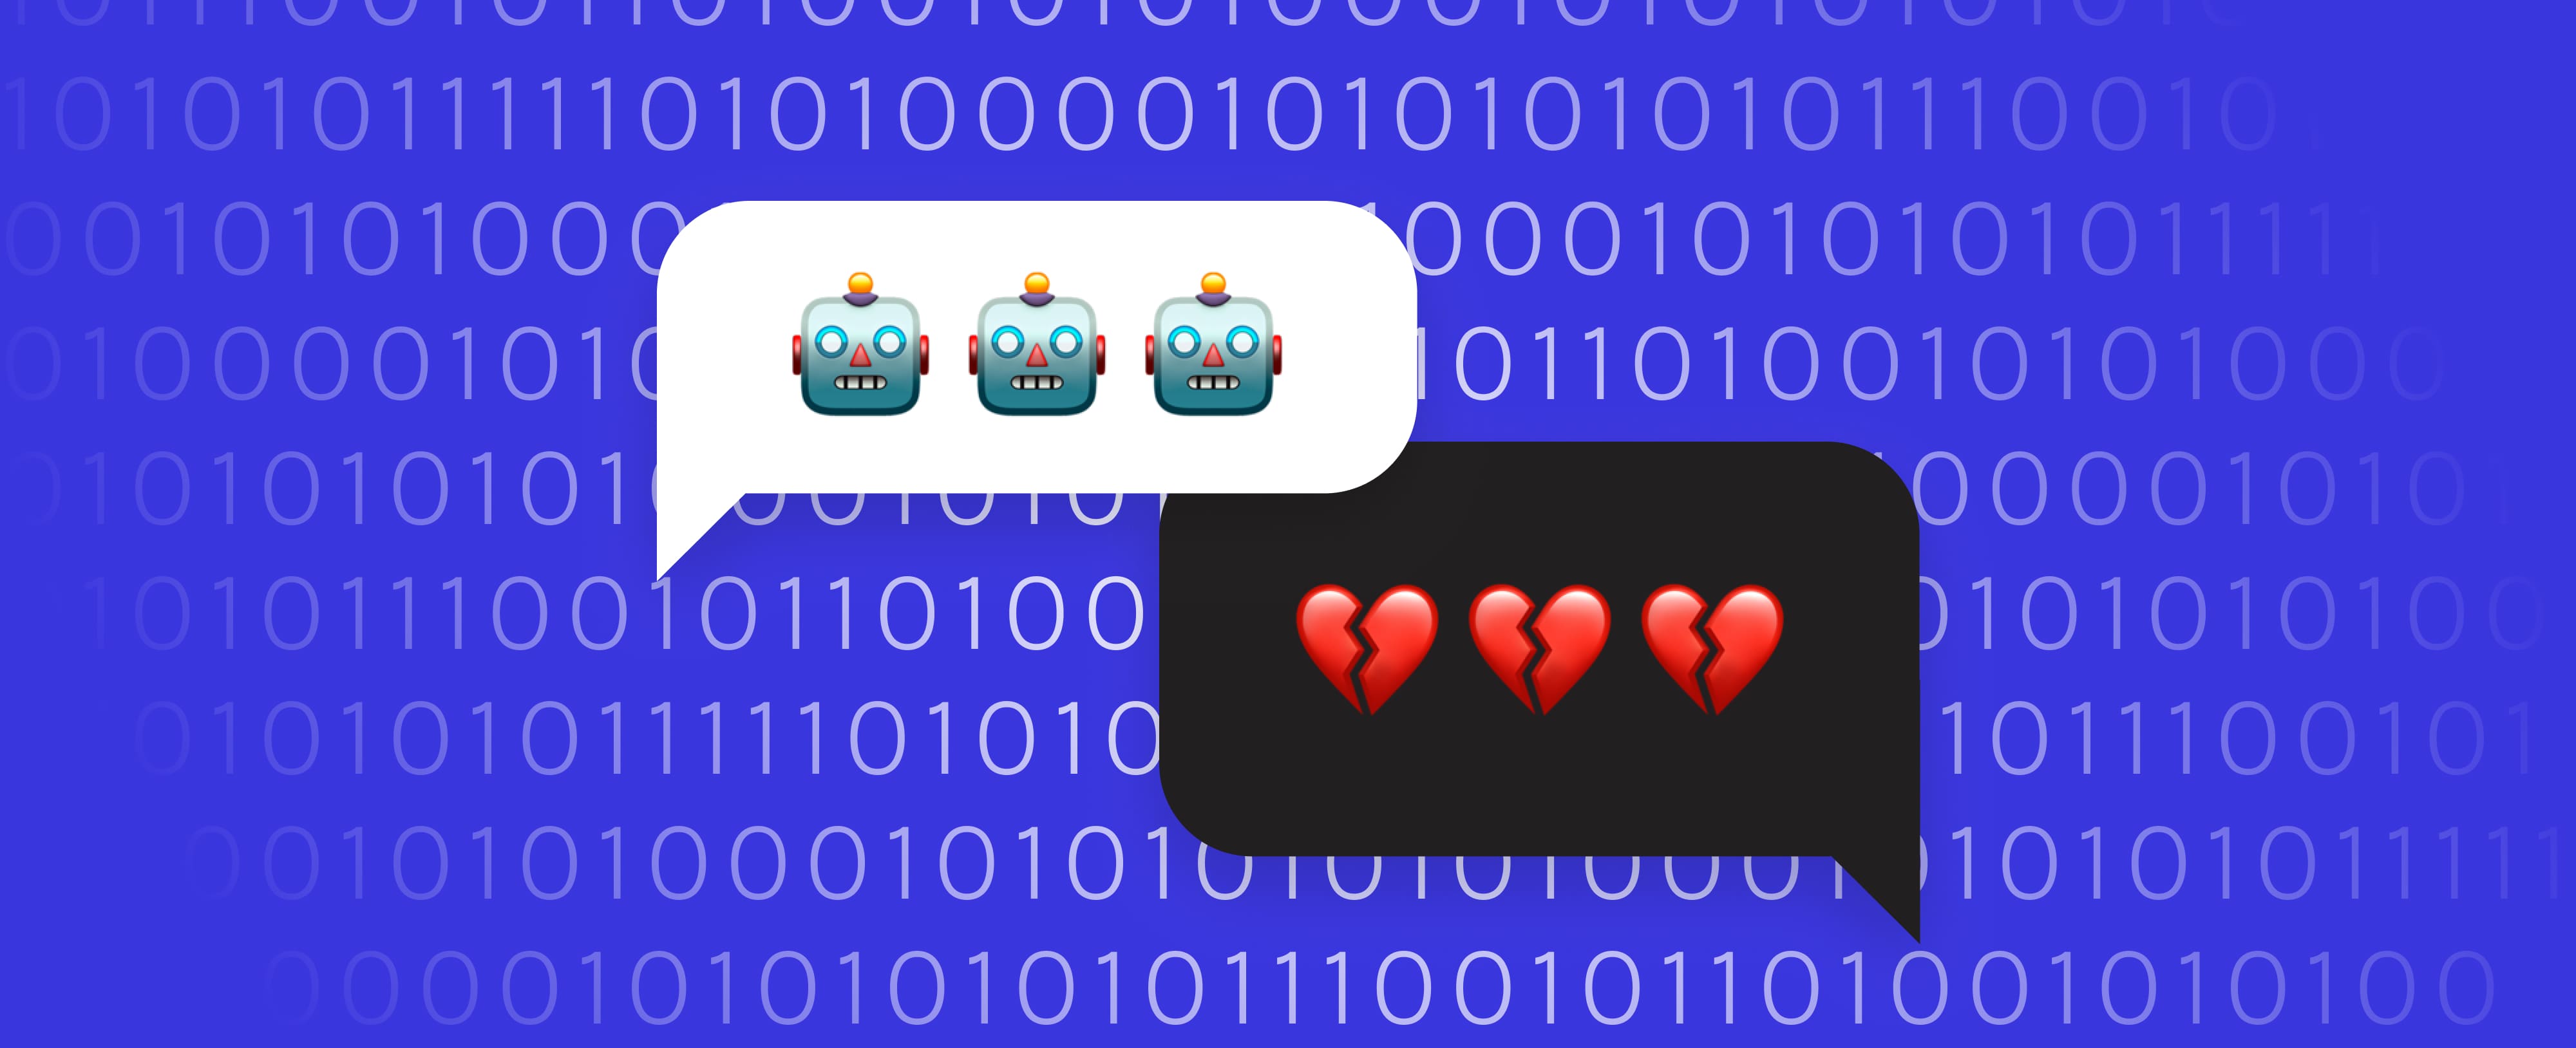 Never Leave Chatbots Alone: Your Guide to Humanizing WhatsApp Bots in 4 Easy Steps blog